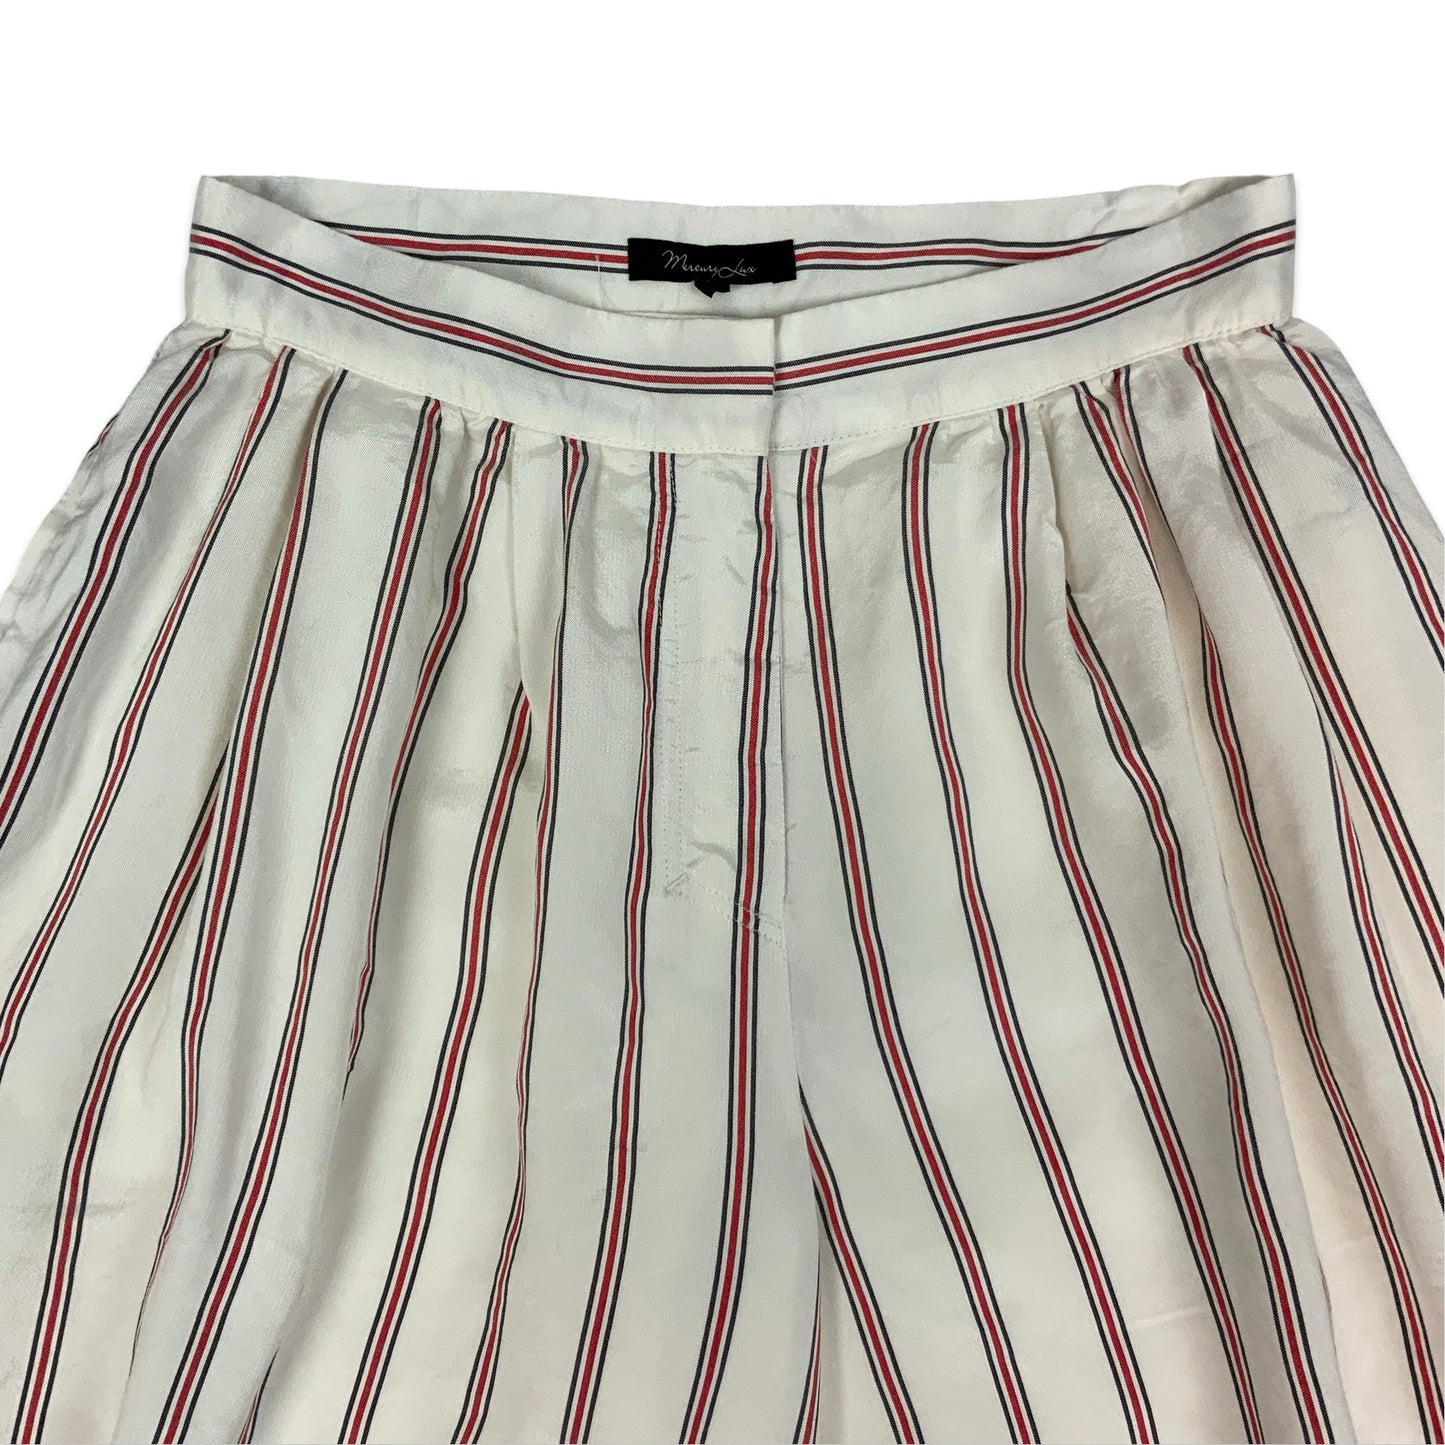 Vintage White Red & Black Striped Culottes 8